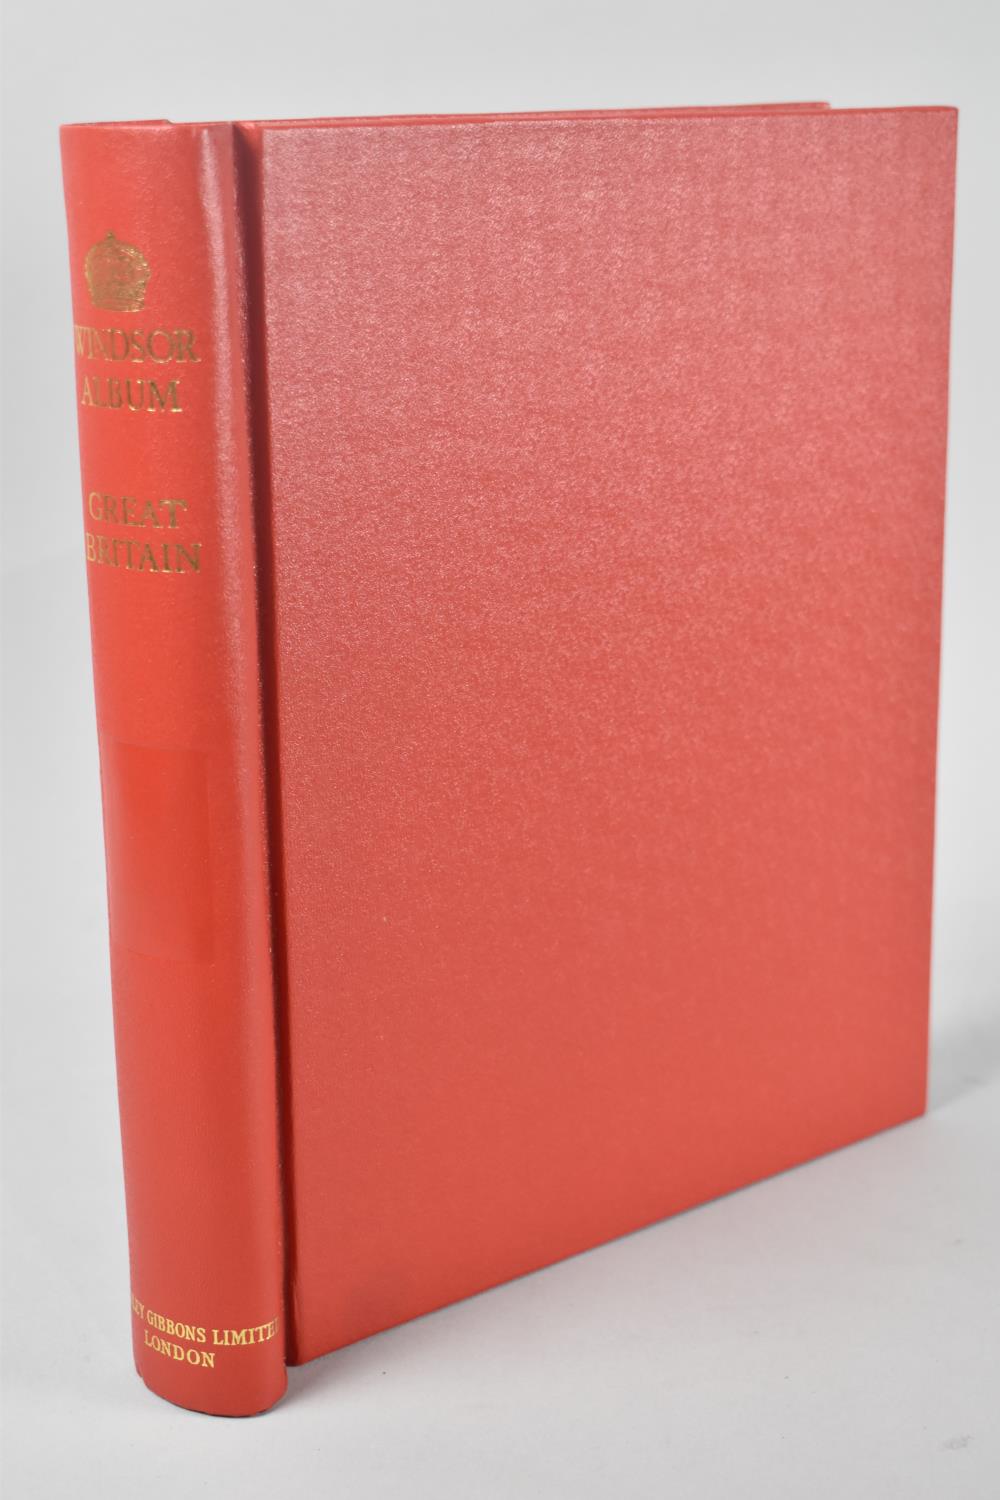 A Stanley Gibbons Windsor Stamp Album Containing an Almost Complete Run of QEII Commemorative Stamps